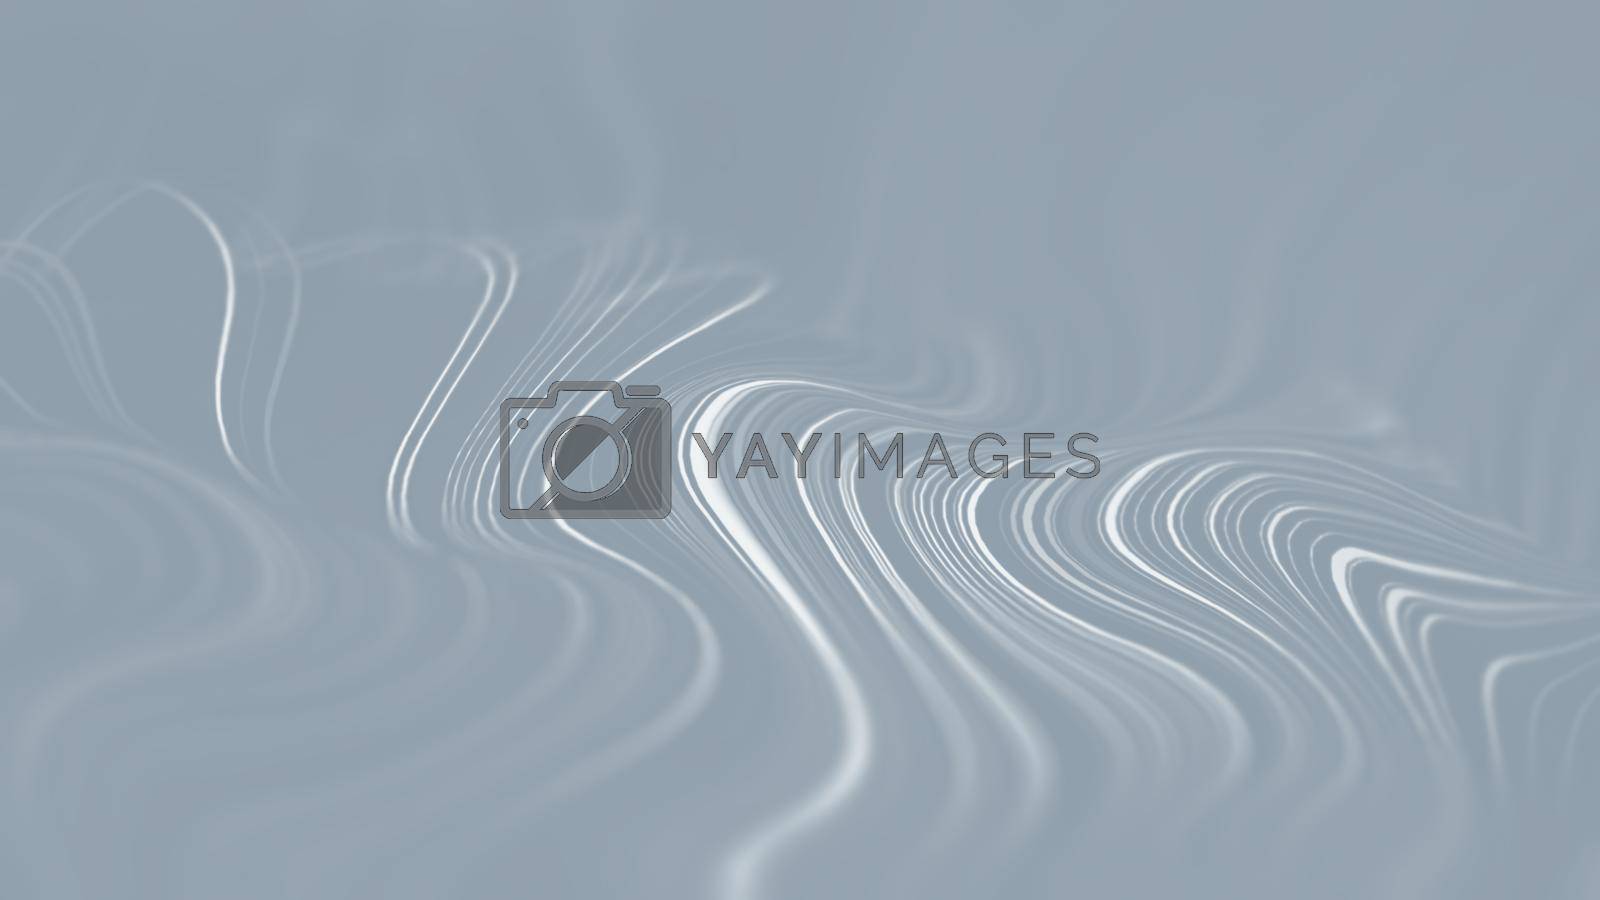 Royalty free image of Light abstract technology background. Technology network digital pattern by DmytroRazinkov